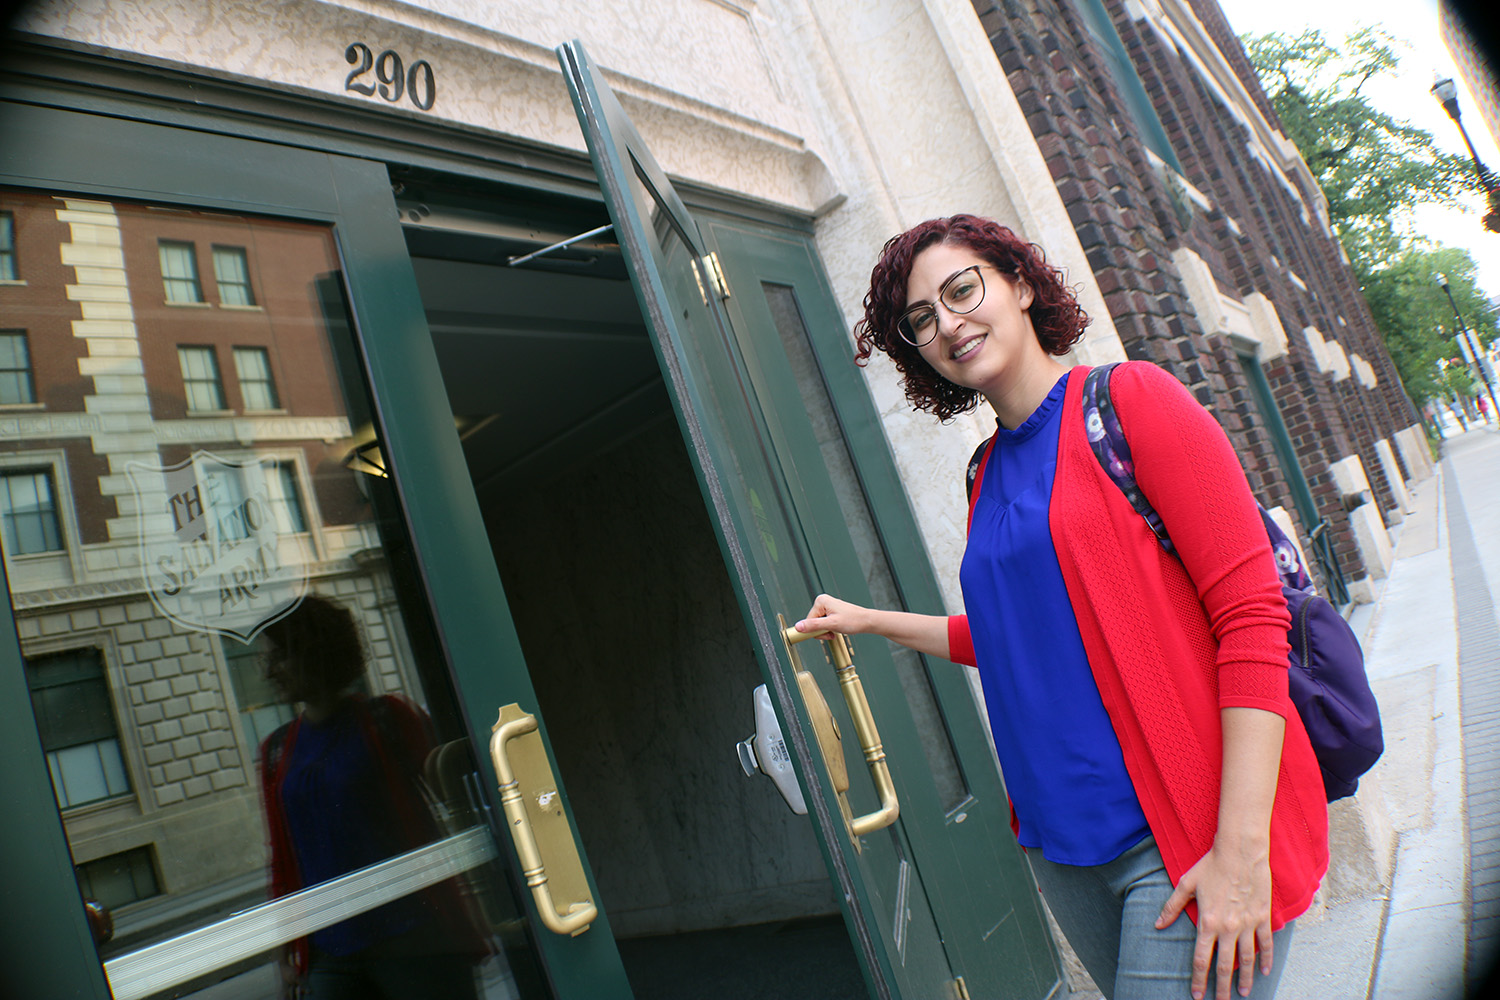 A female student smiles at the camera as she pulls the front door open.